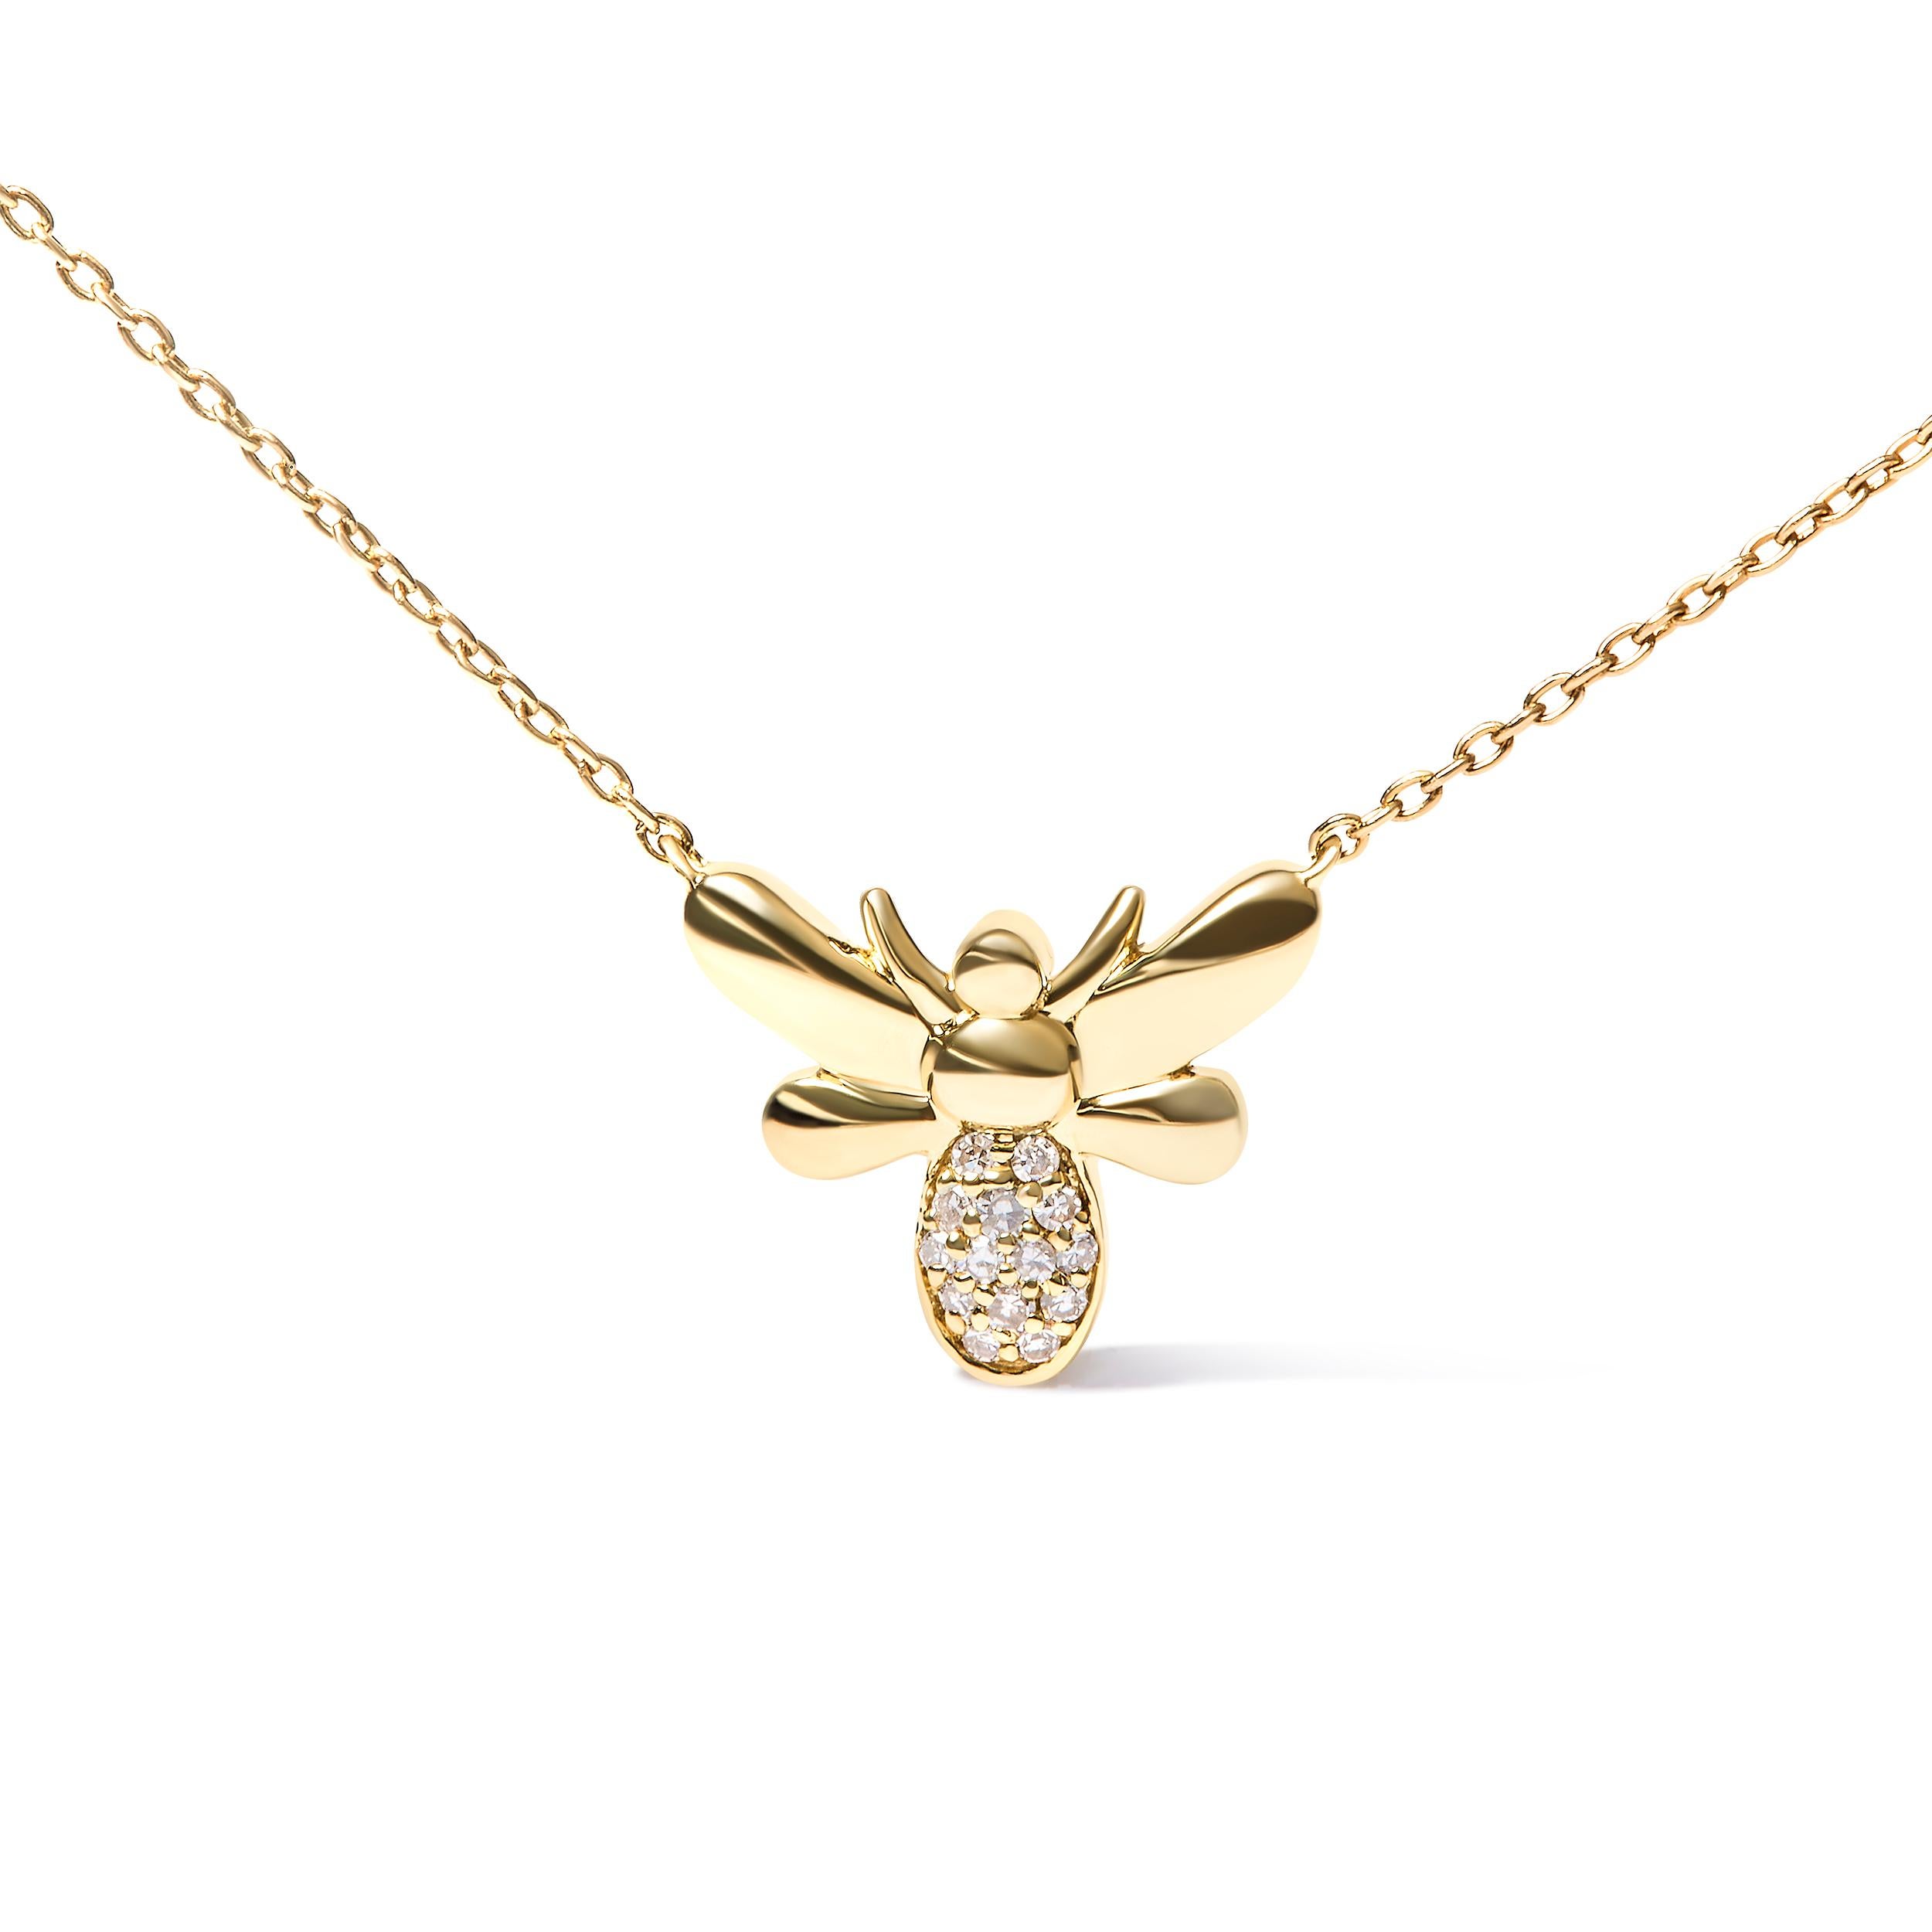 Introducing a captivating symbol of nature's beauty, this exquisite 10K Yellow Gold Bumble Bee Pendant Necklace is a must-have for any woman who appreciates elegance and grace. With delicate diamond accents adorning its charming design, this